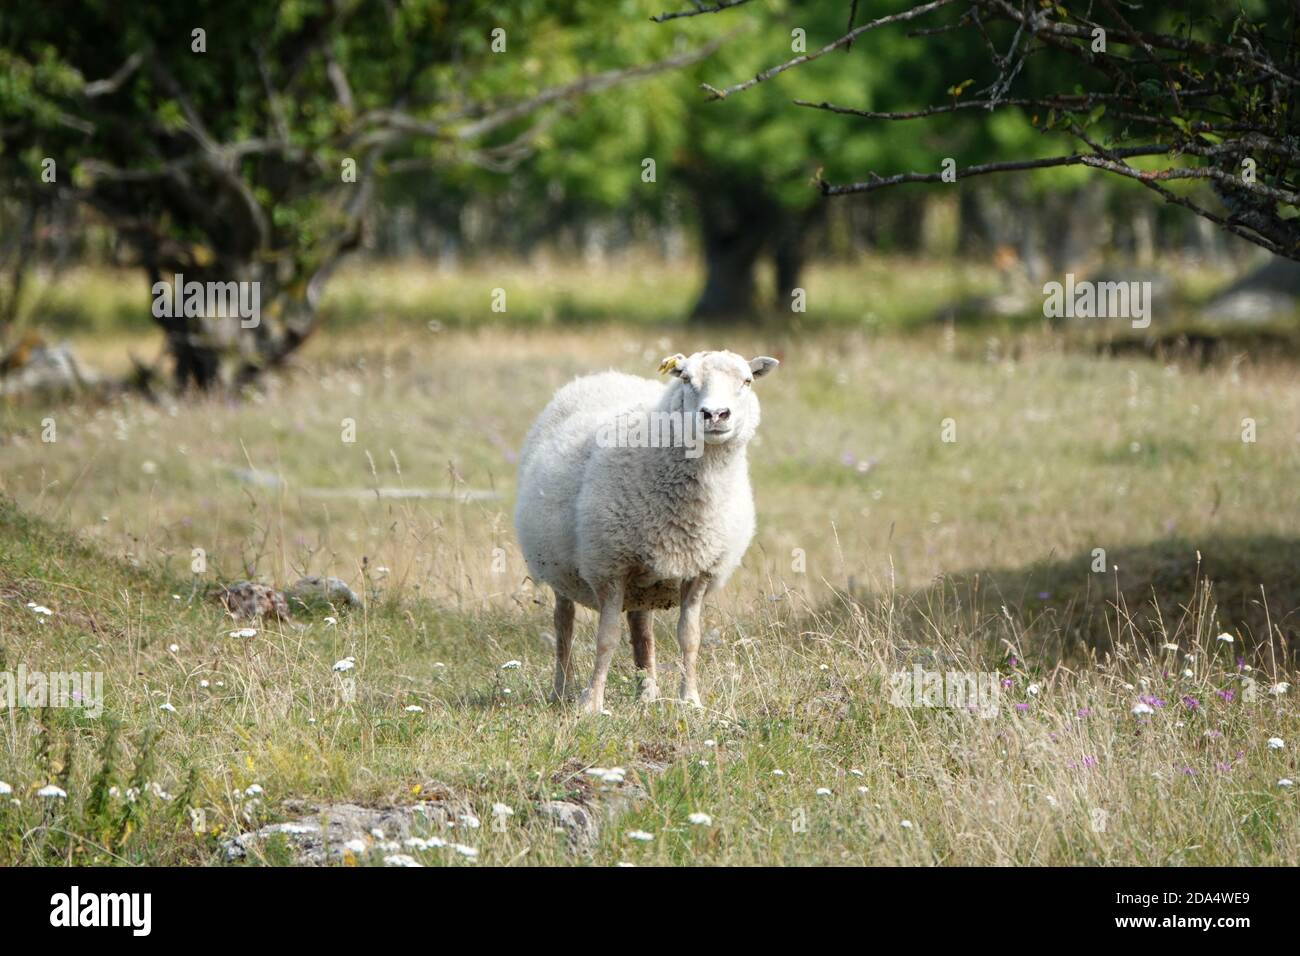 Wild animals - sheep portrait. Farmland View of a Woolly Sheep in a Green forest Field Stock Photo